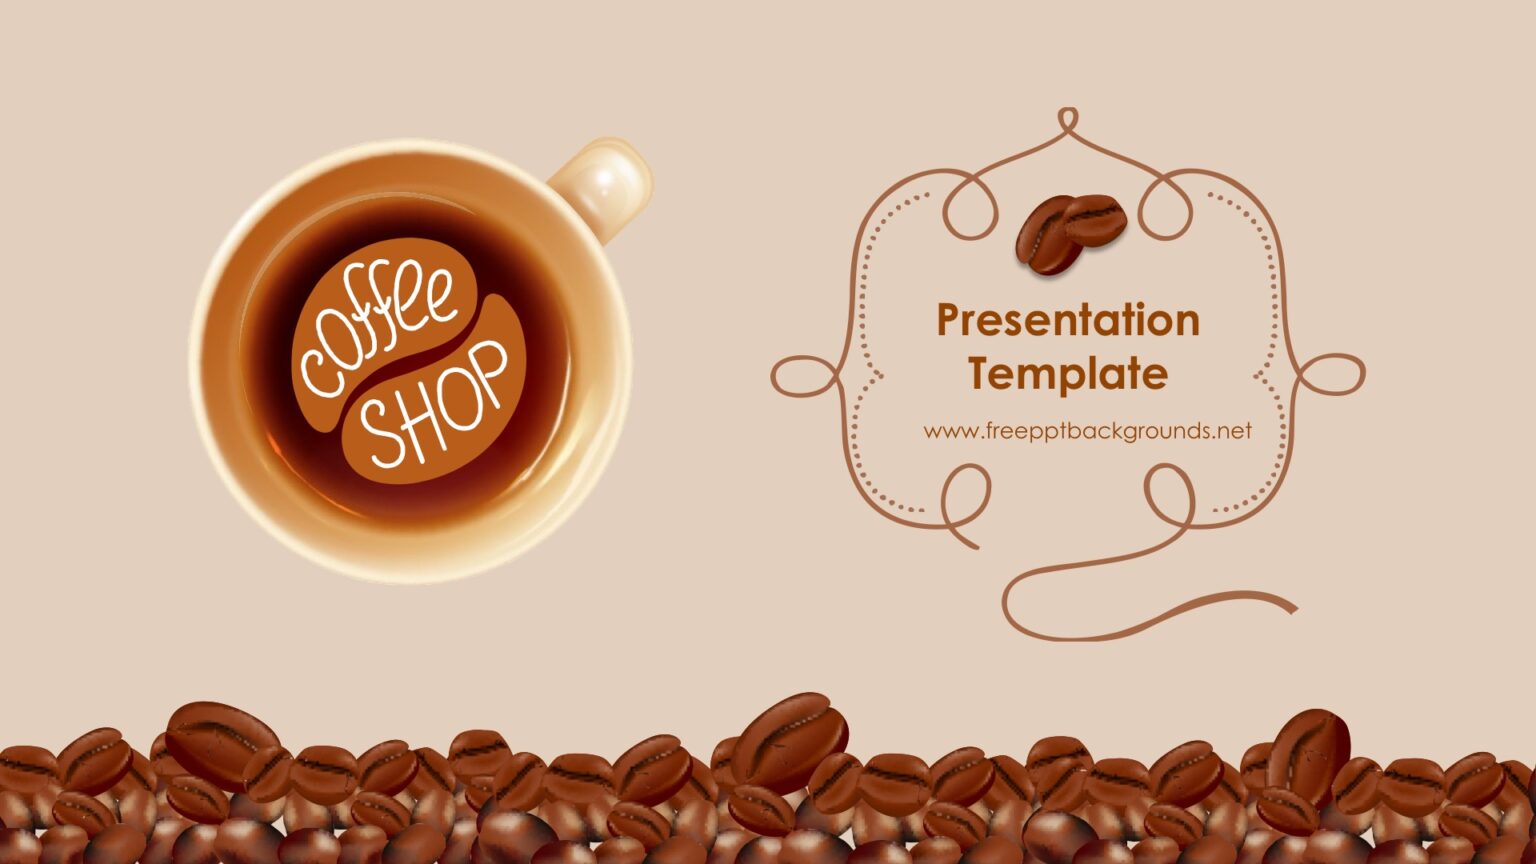 Coffee Shop Powerpoint Templates Brown, Food & Drink Free PPT